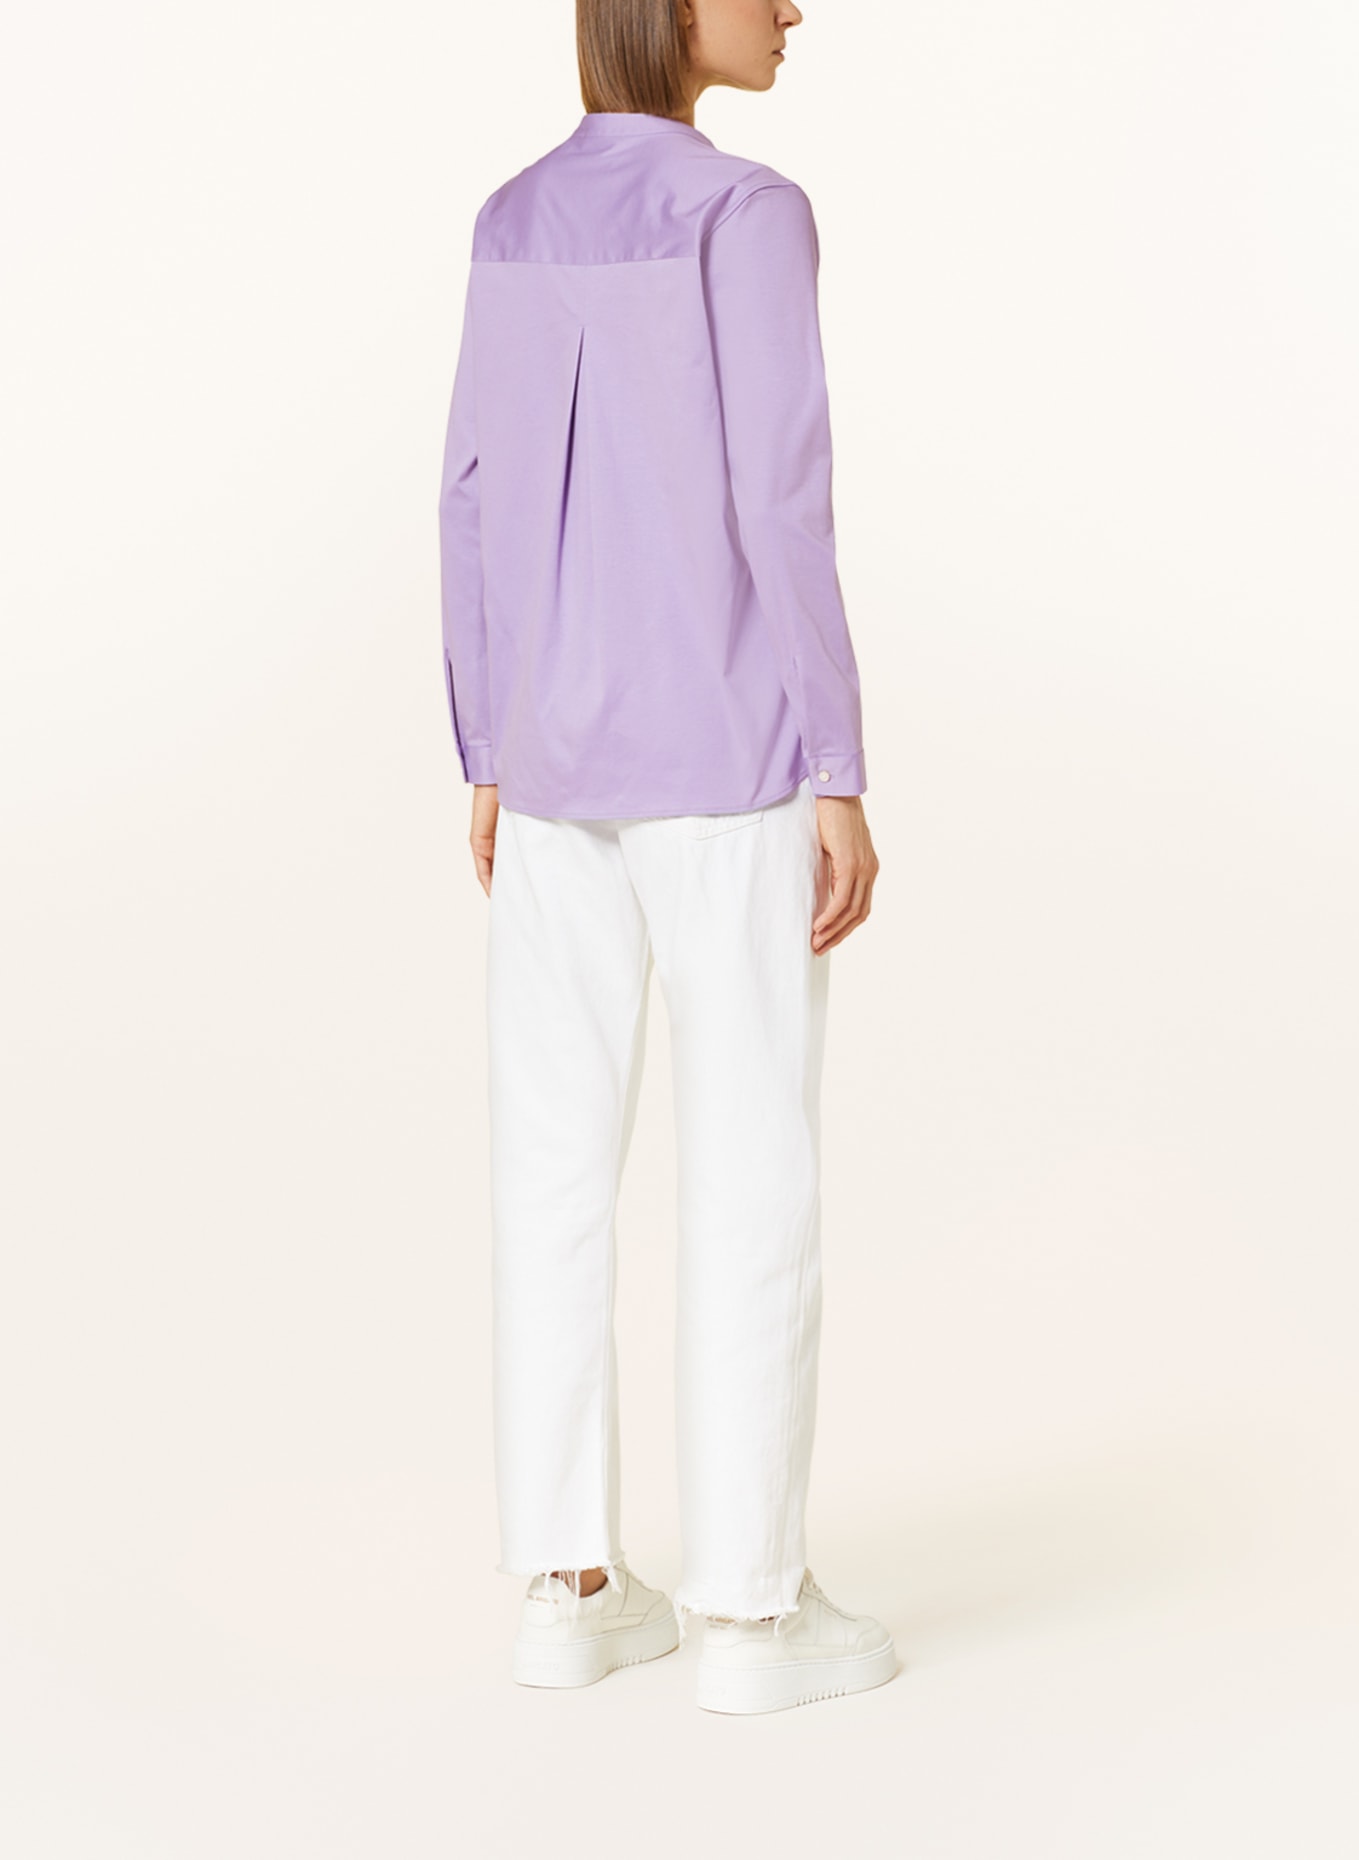 Soluzione Shirt blouse made of jersey, Color: LIGHT PURPLE (Image 3)